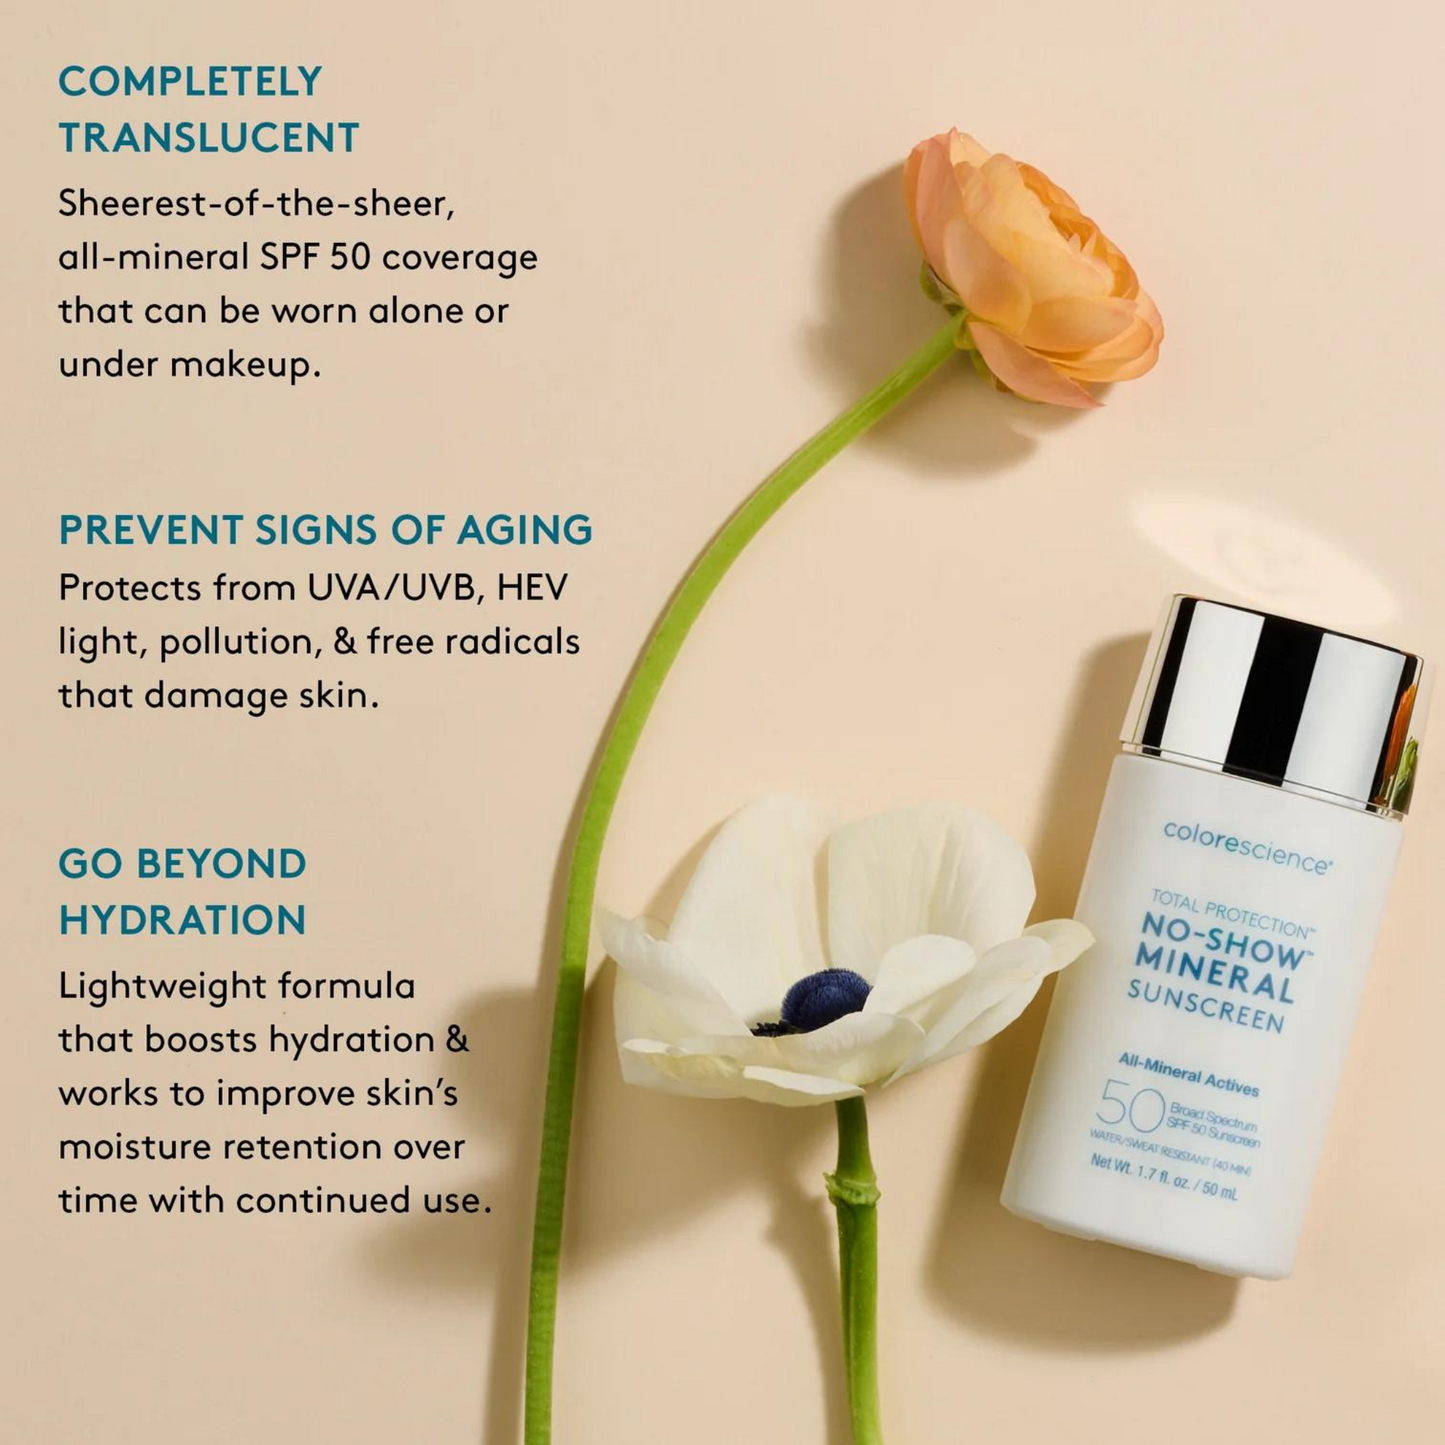 Total Protection™ No-Show™ Mineral Sunscreen SPF 50 | Colorescience®